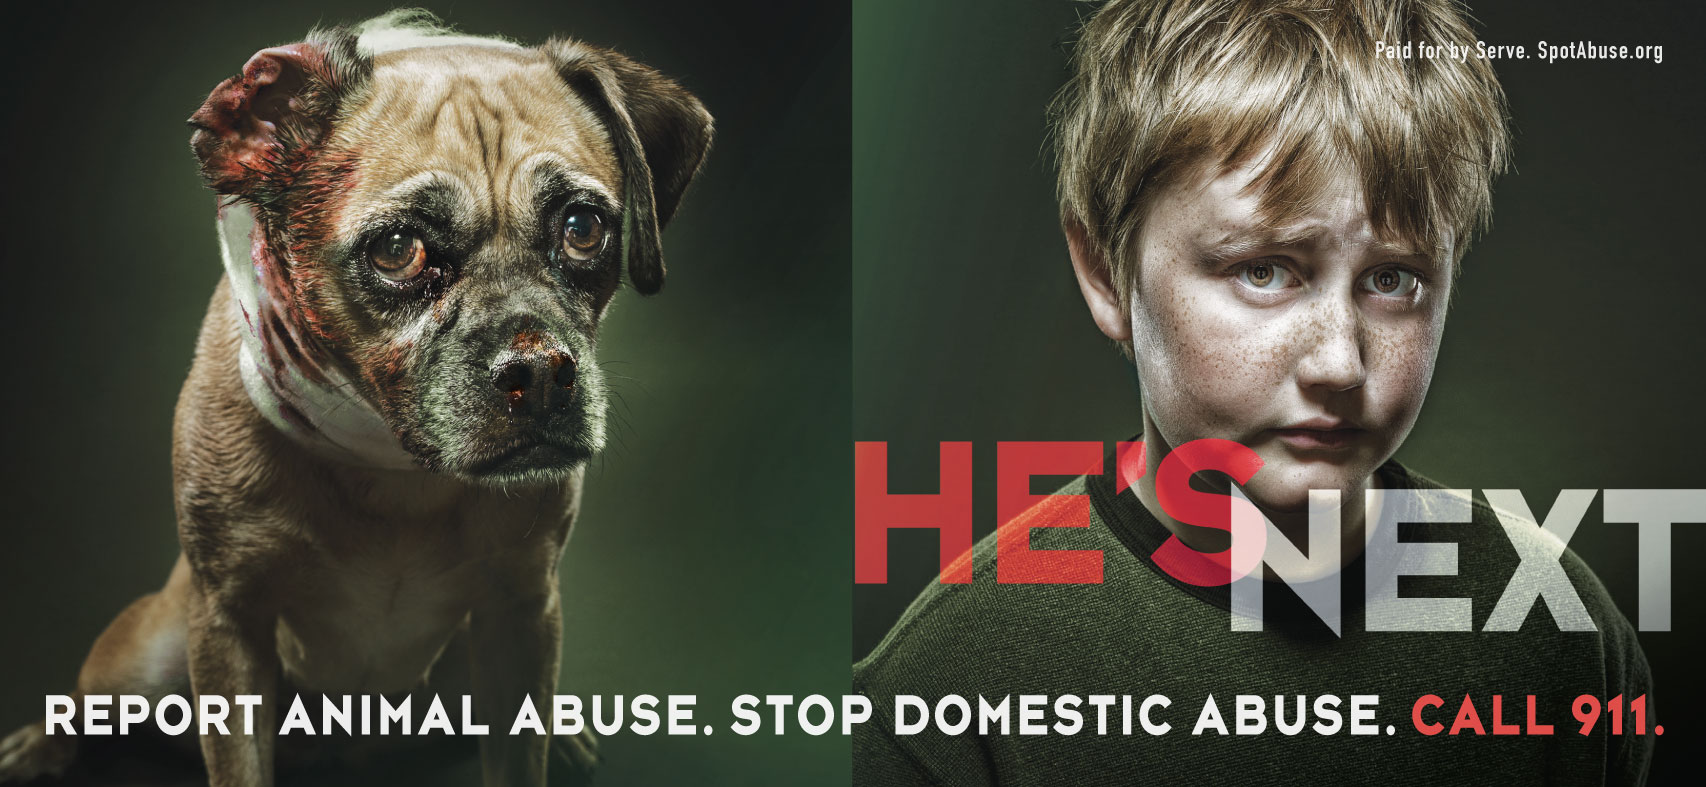 The Link Between Animal and Domestic Abuse - NHSPCA